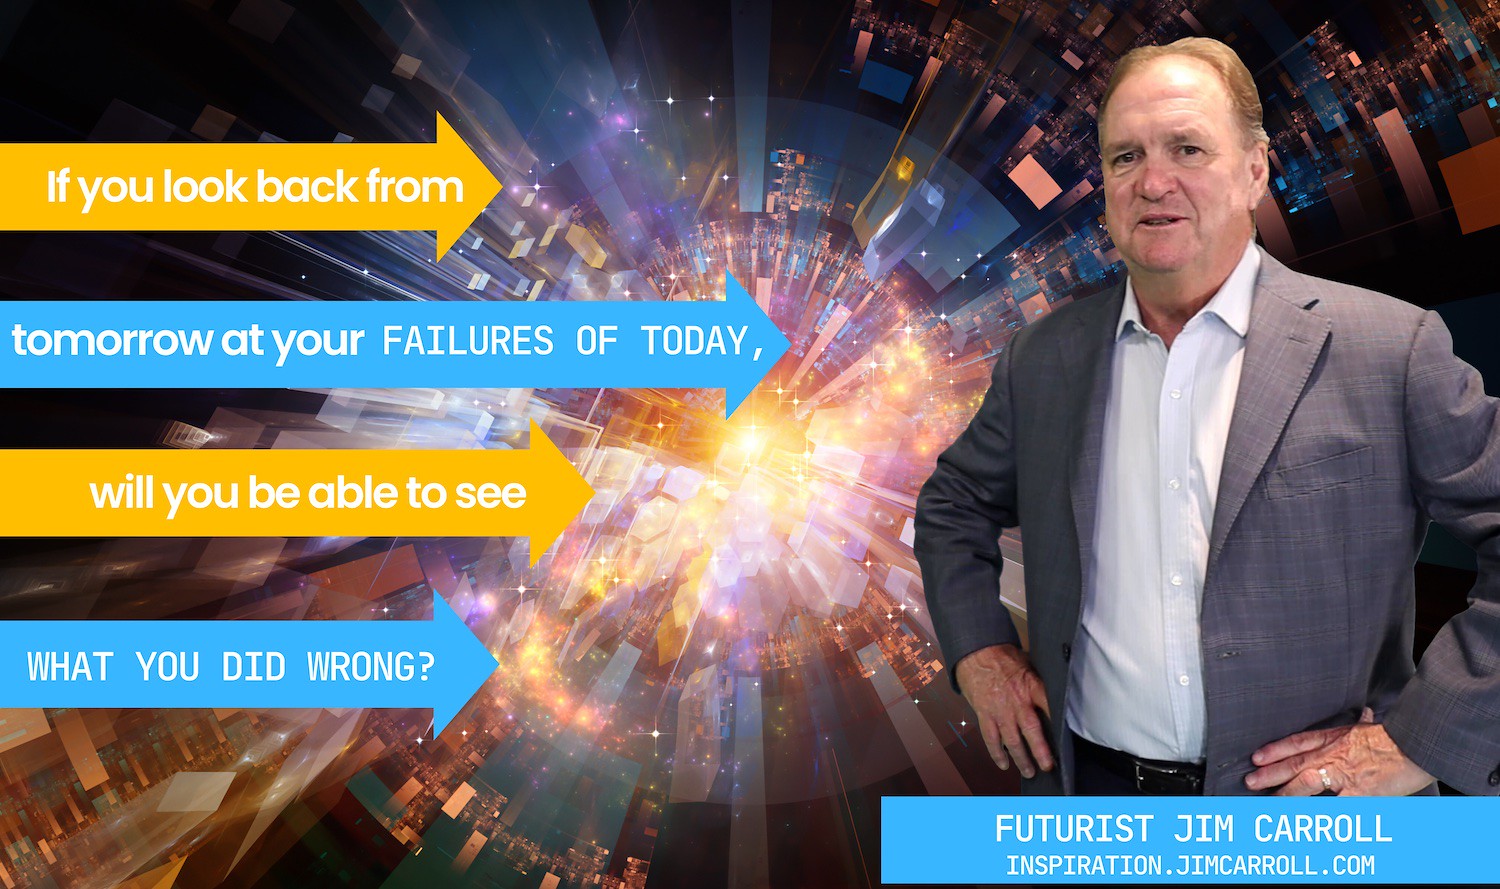 "If you look back from tomorrow at your failures of today, will you be able to see what you did wrong?"- Futurist Jim Carroll